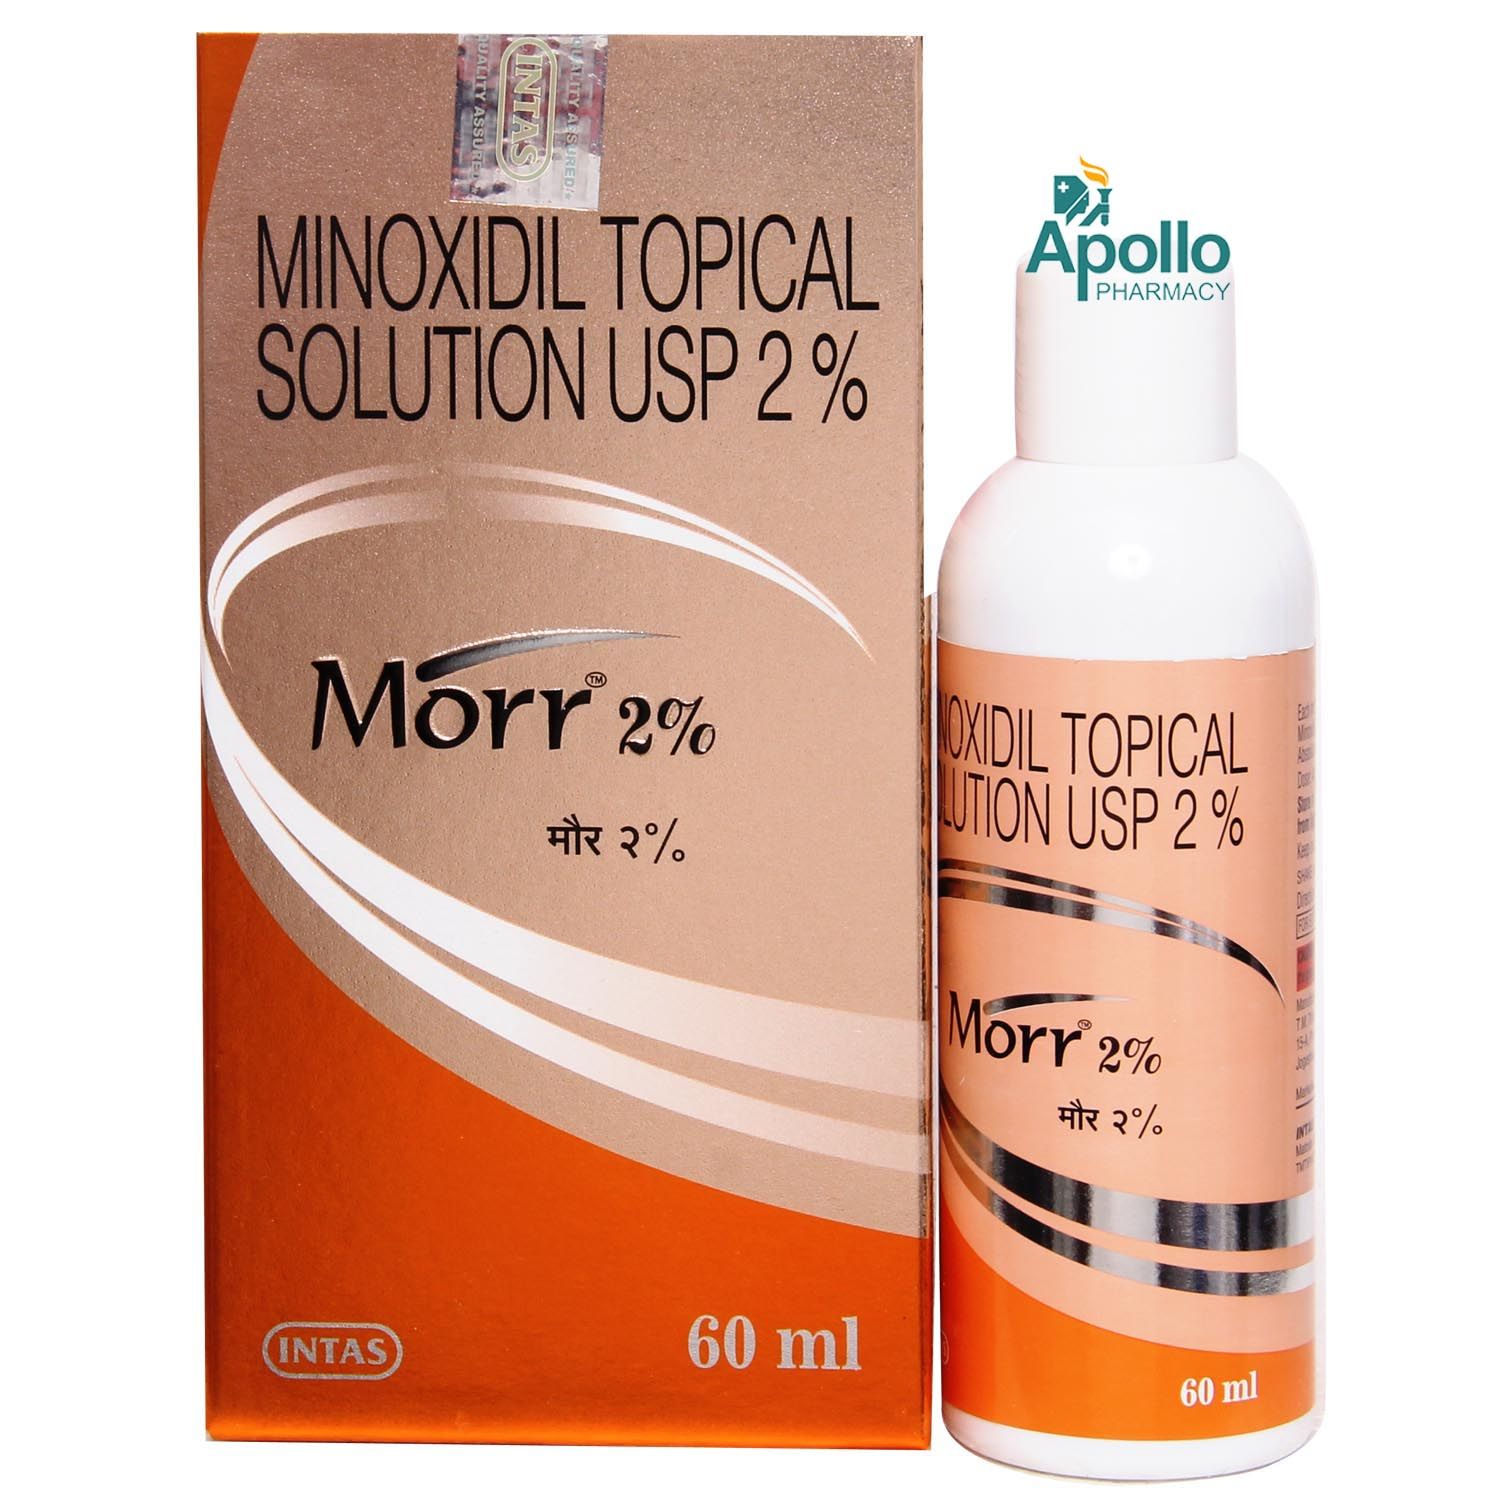 Morr 2% Topical Solution 60 ml Price, Uses, Side Effects, Composition -  Apollo Pharmacy